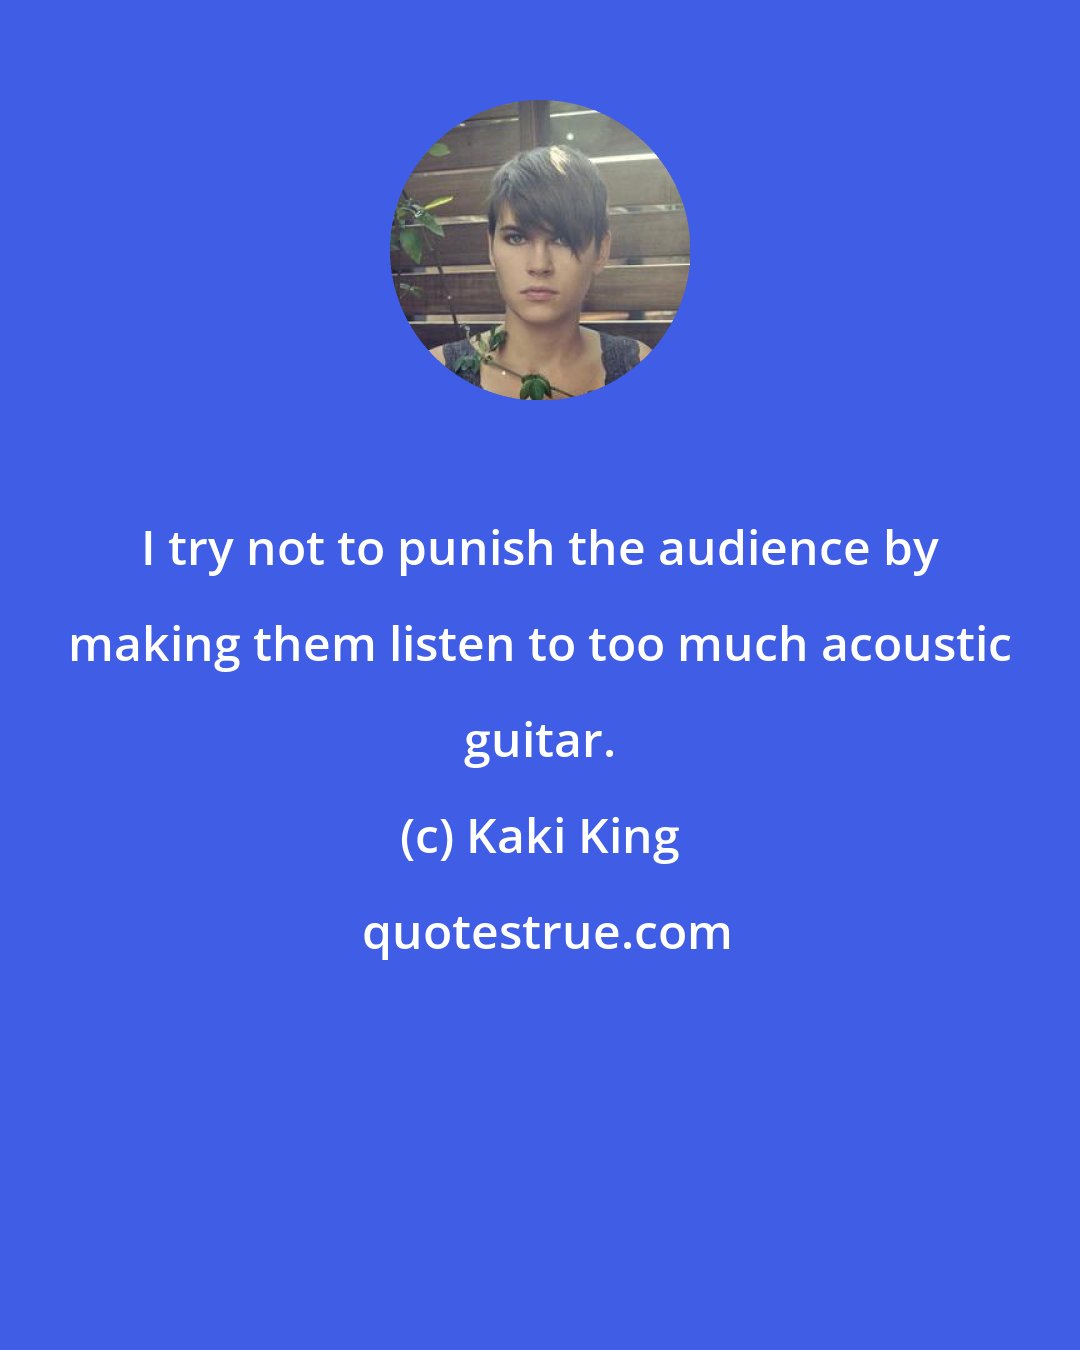 Kaki King: I try not to punish the audience by making them listen to too much acoustic guitar.